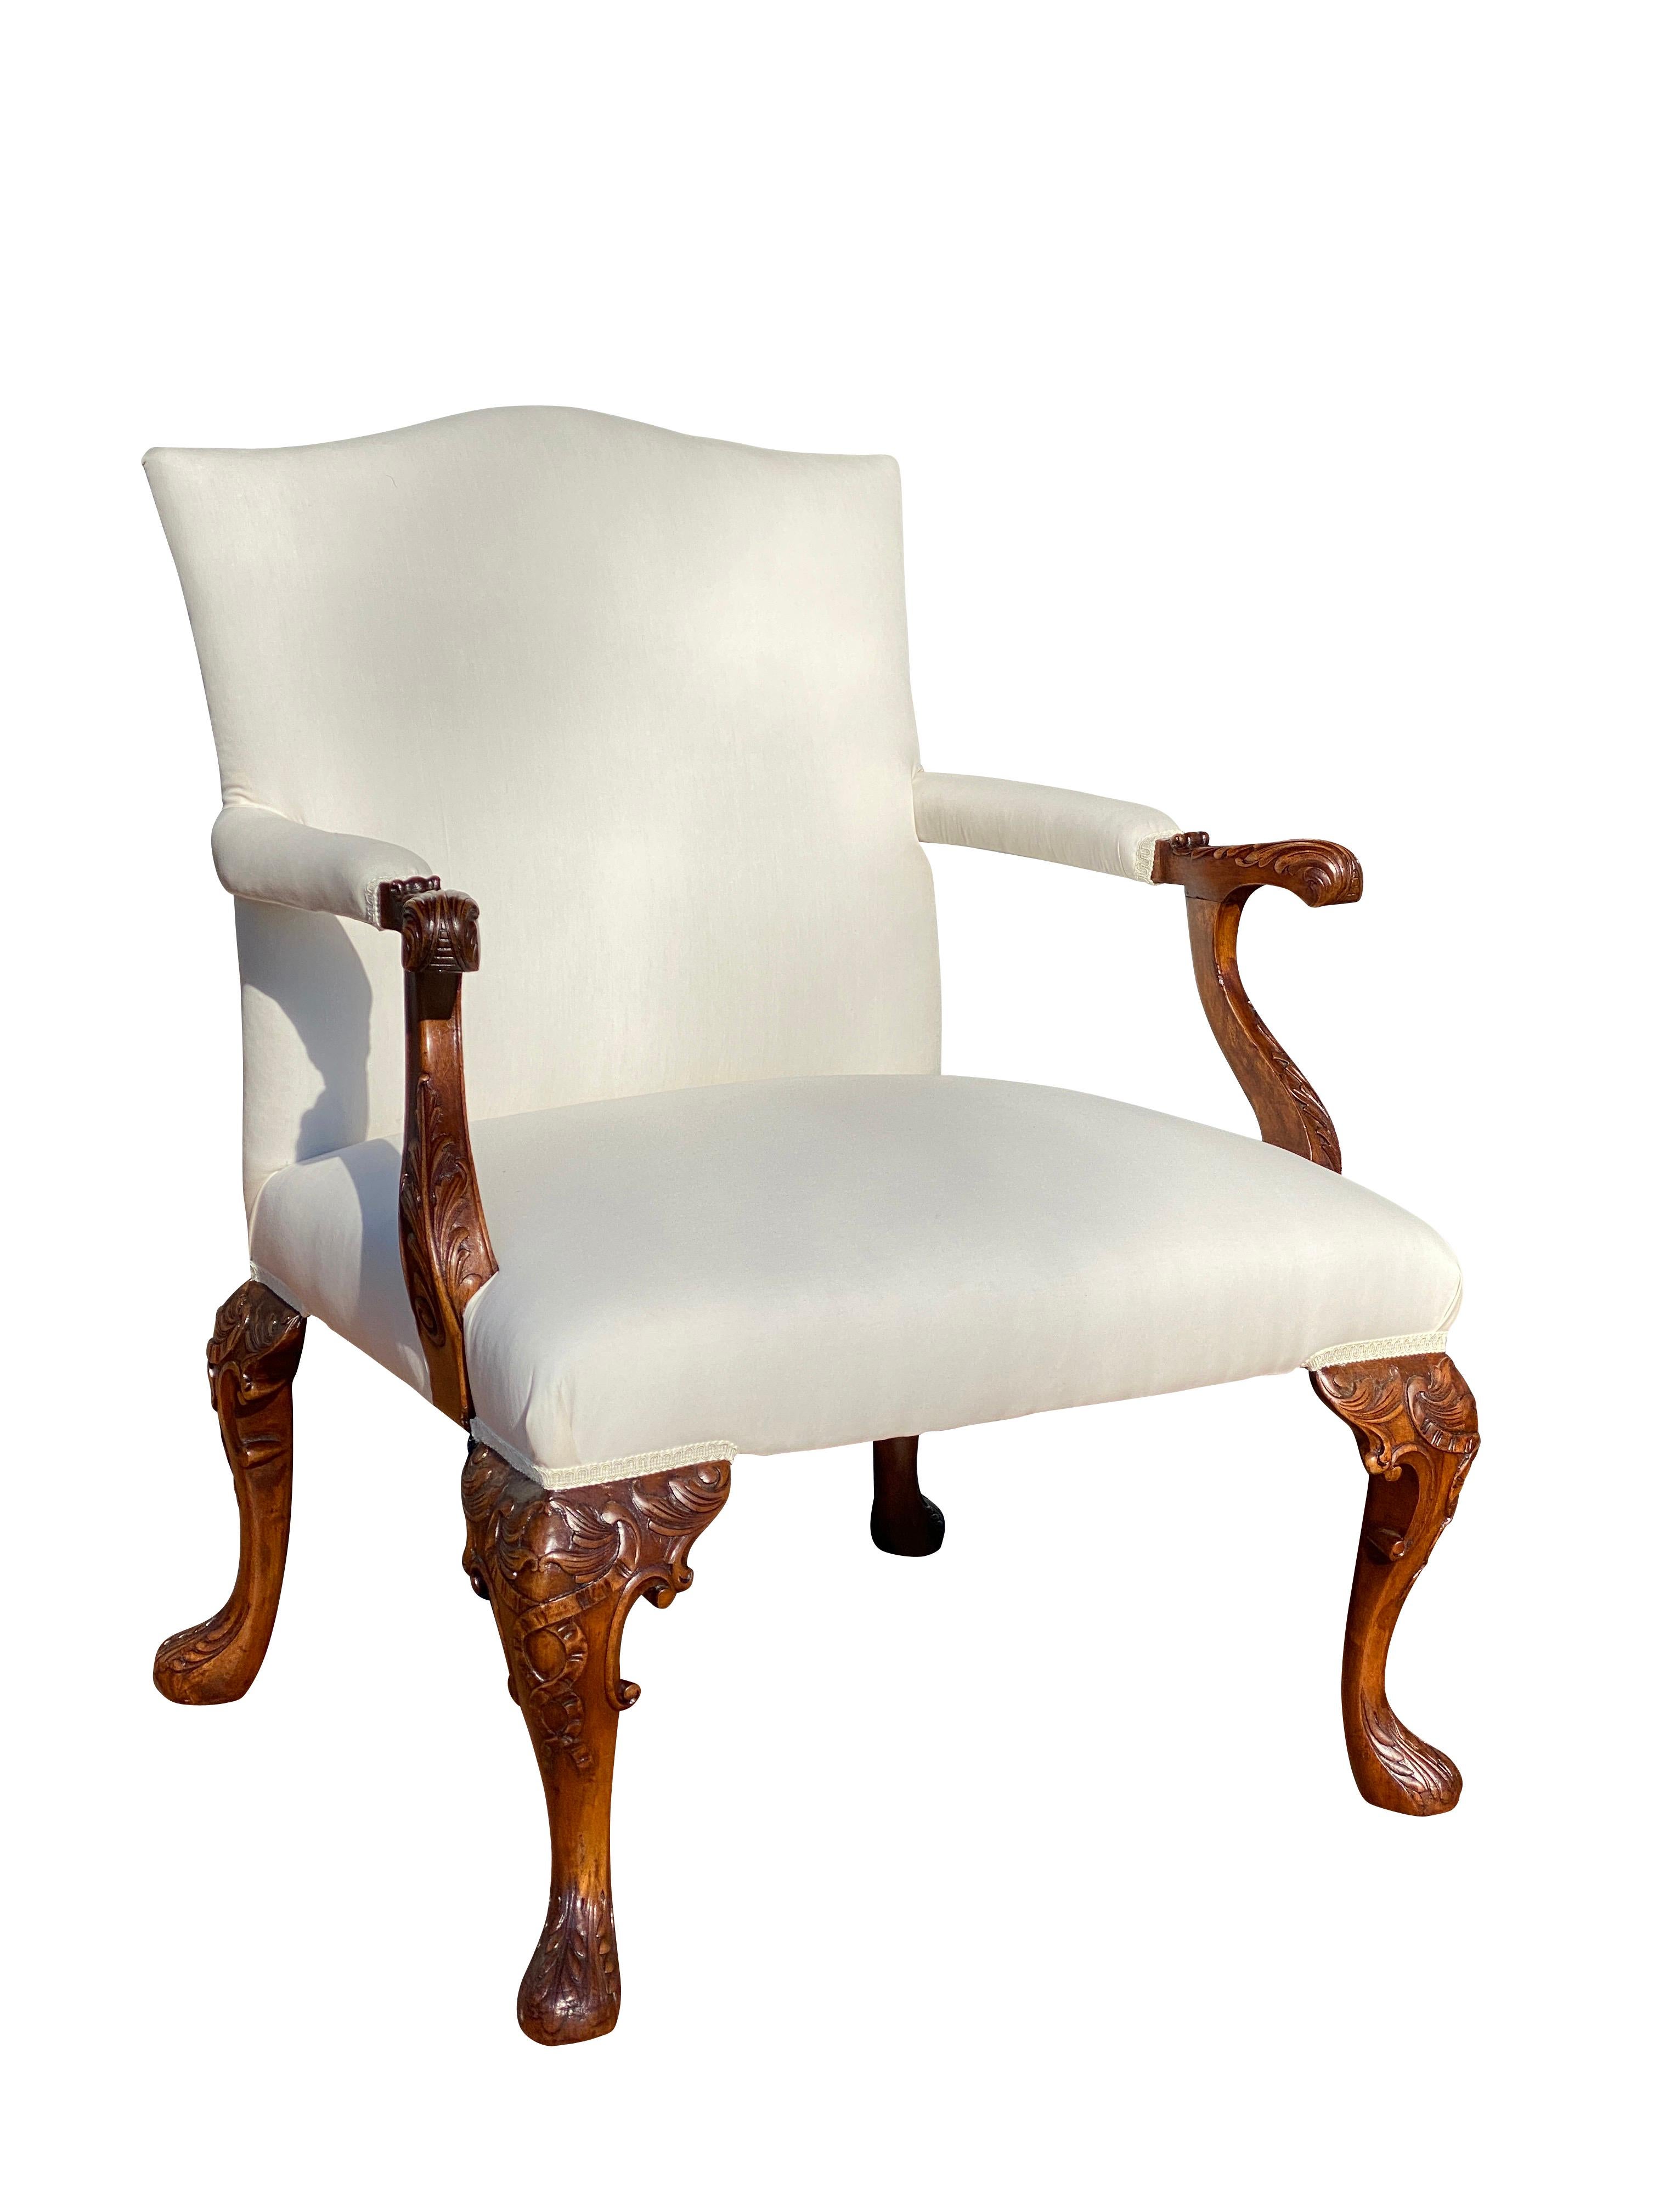 Serpentine upholstered back with carved scrolled arms and upholstered seat raised on carved cabriole legs and pad feet.